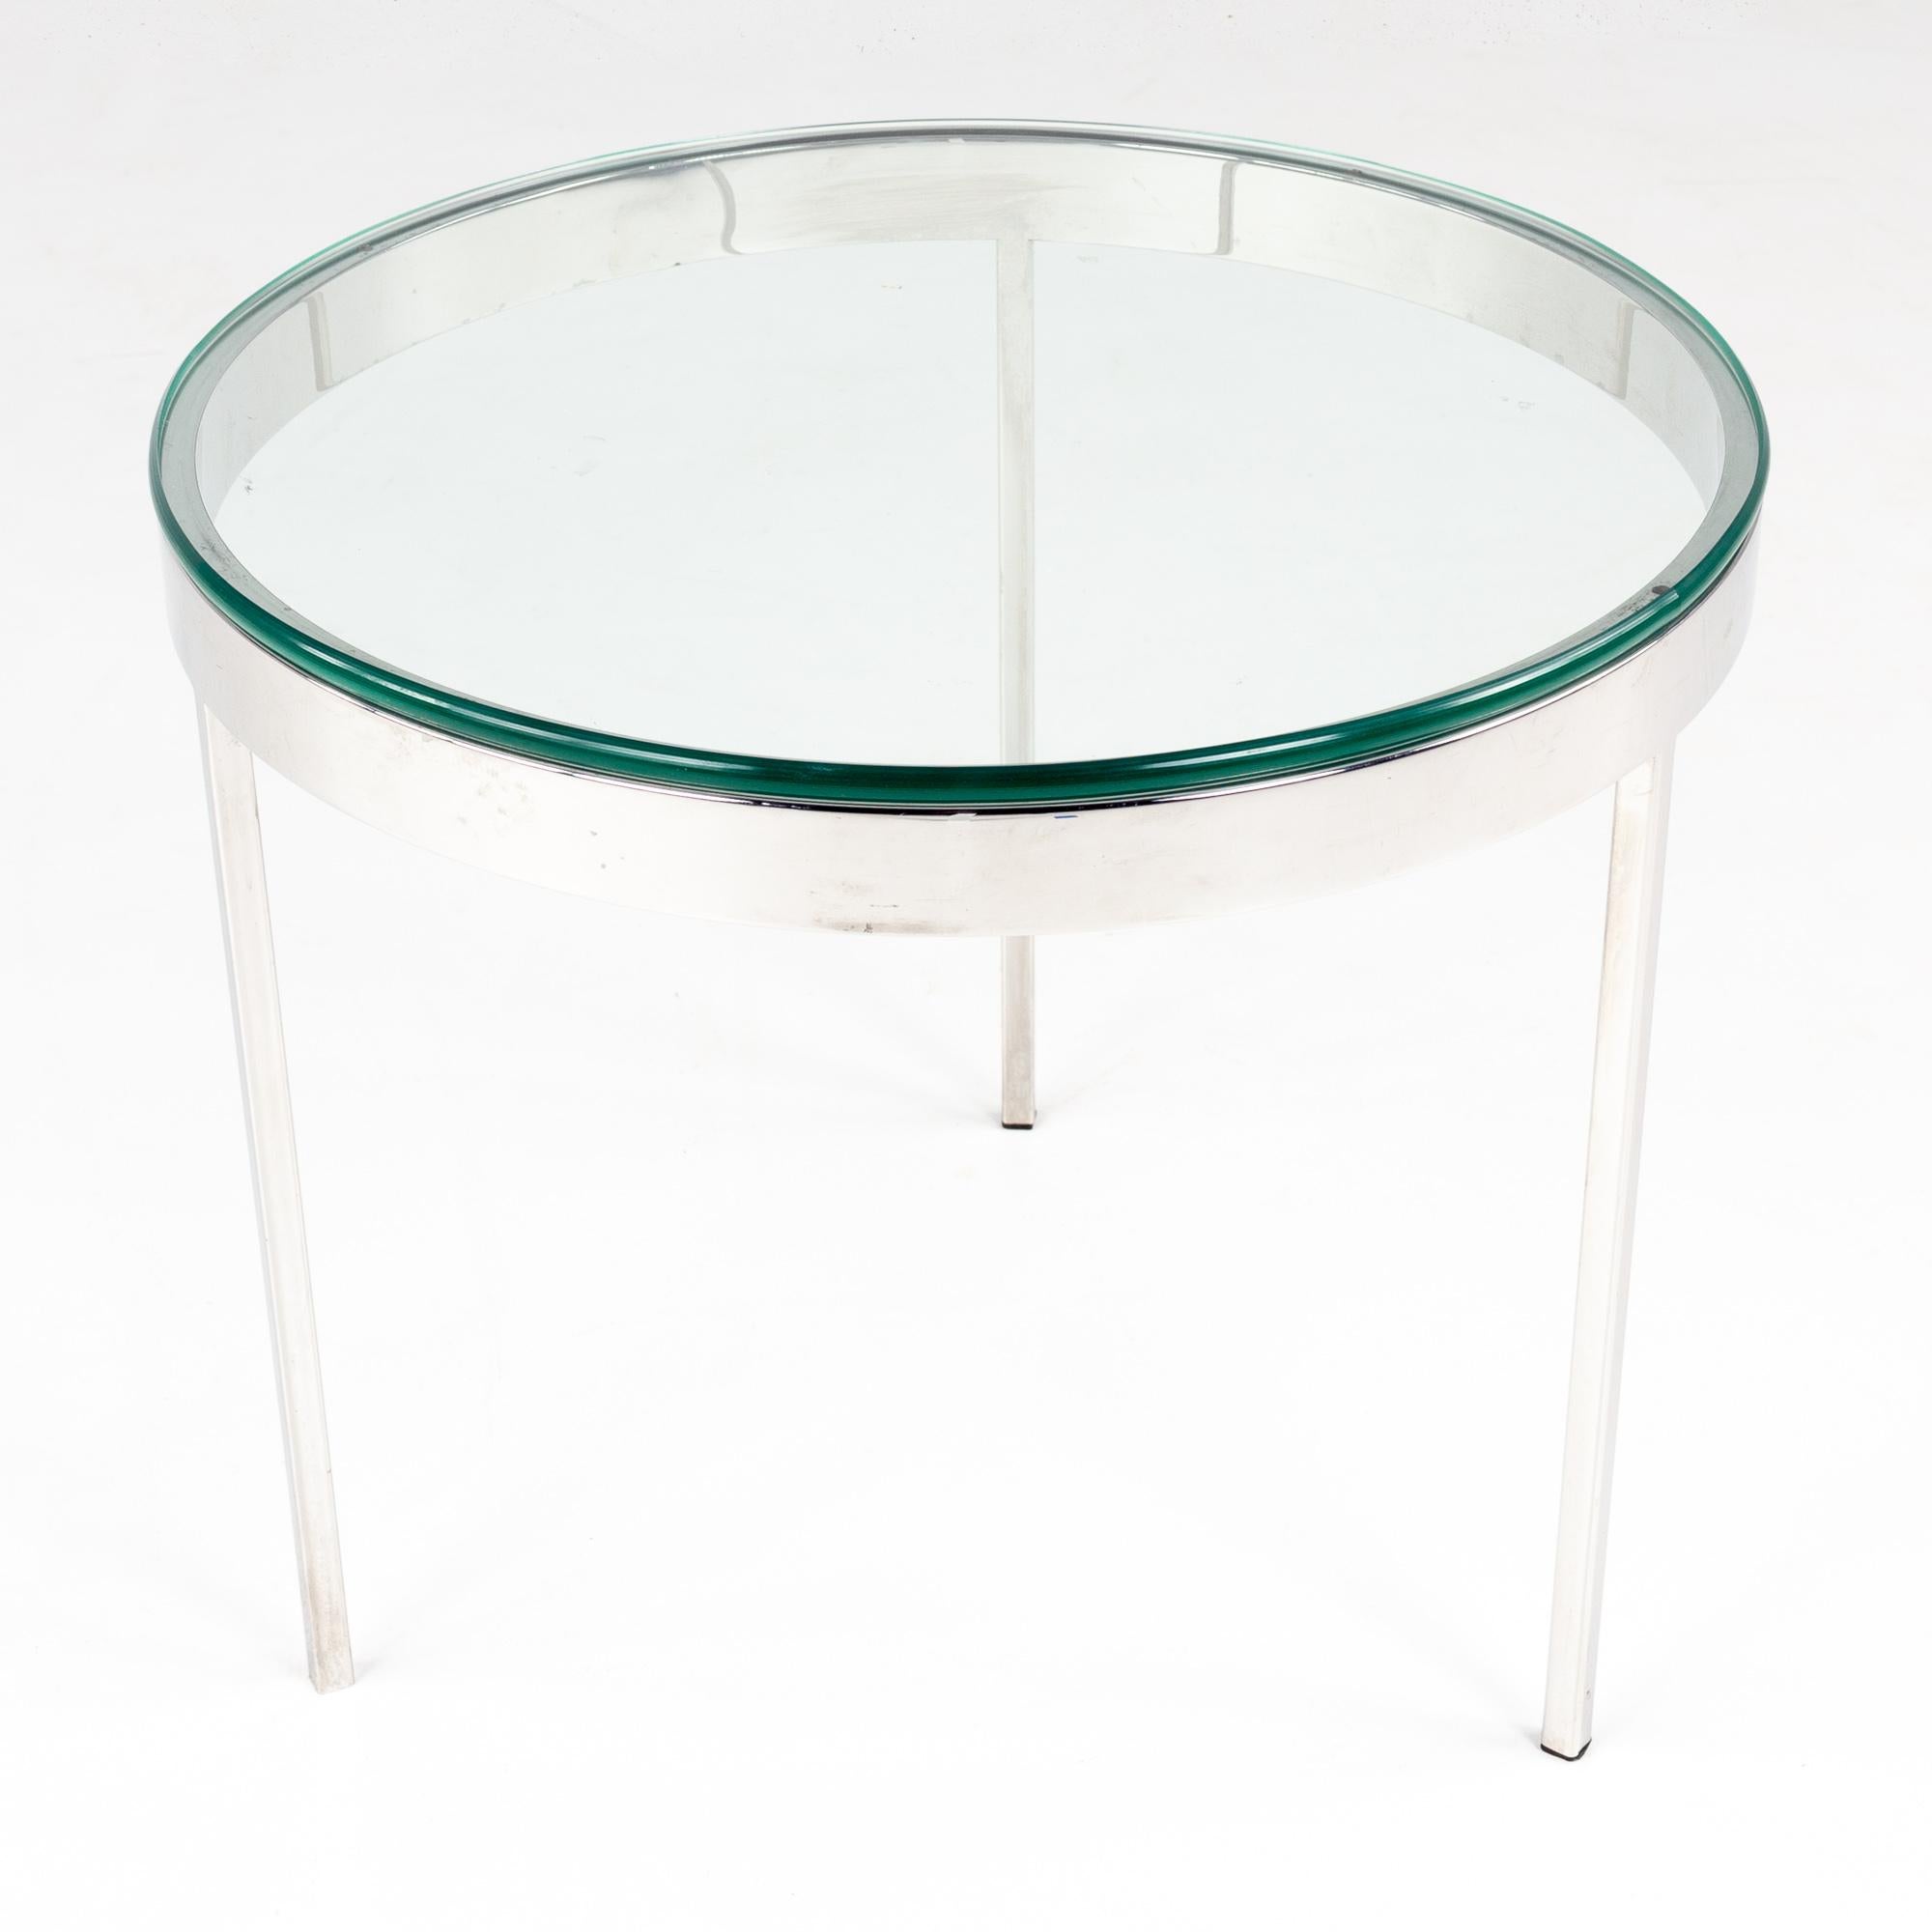 Milo Baughman Style Mid Century Glass and Chrome Side End Table 

This table measures: 18 wide x 18 deep x 16 inches high

All pieces of furniture can be had in what we call restored vintage condition. That means the piece is restored upon purchase